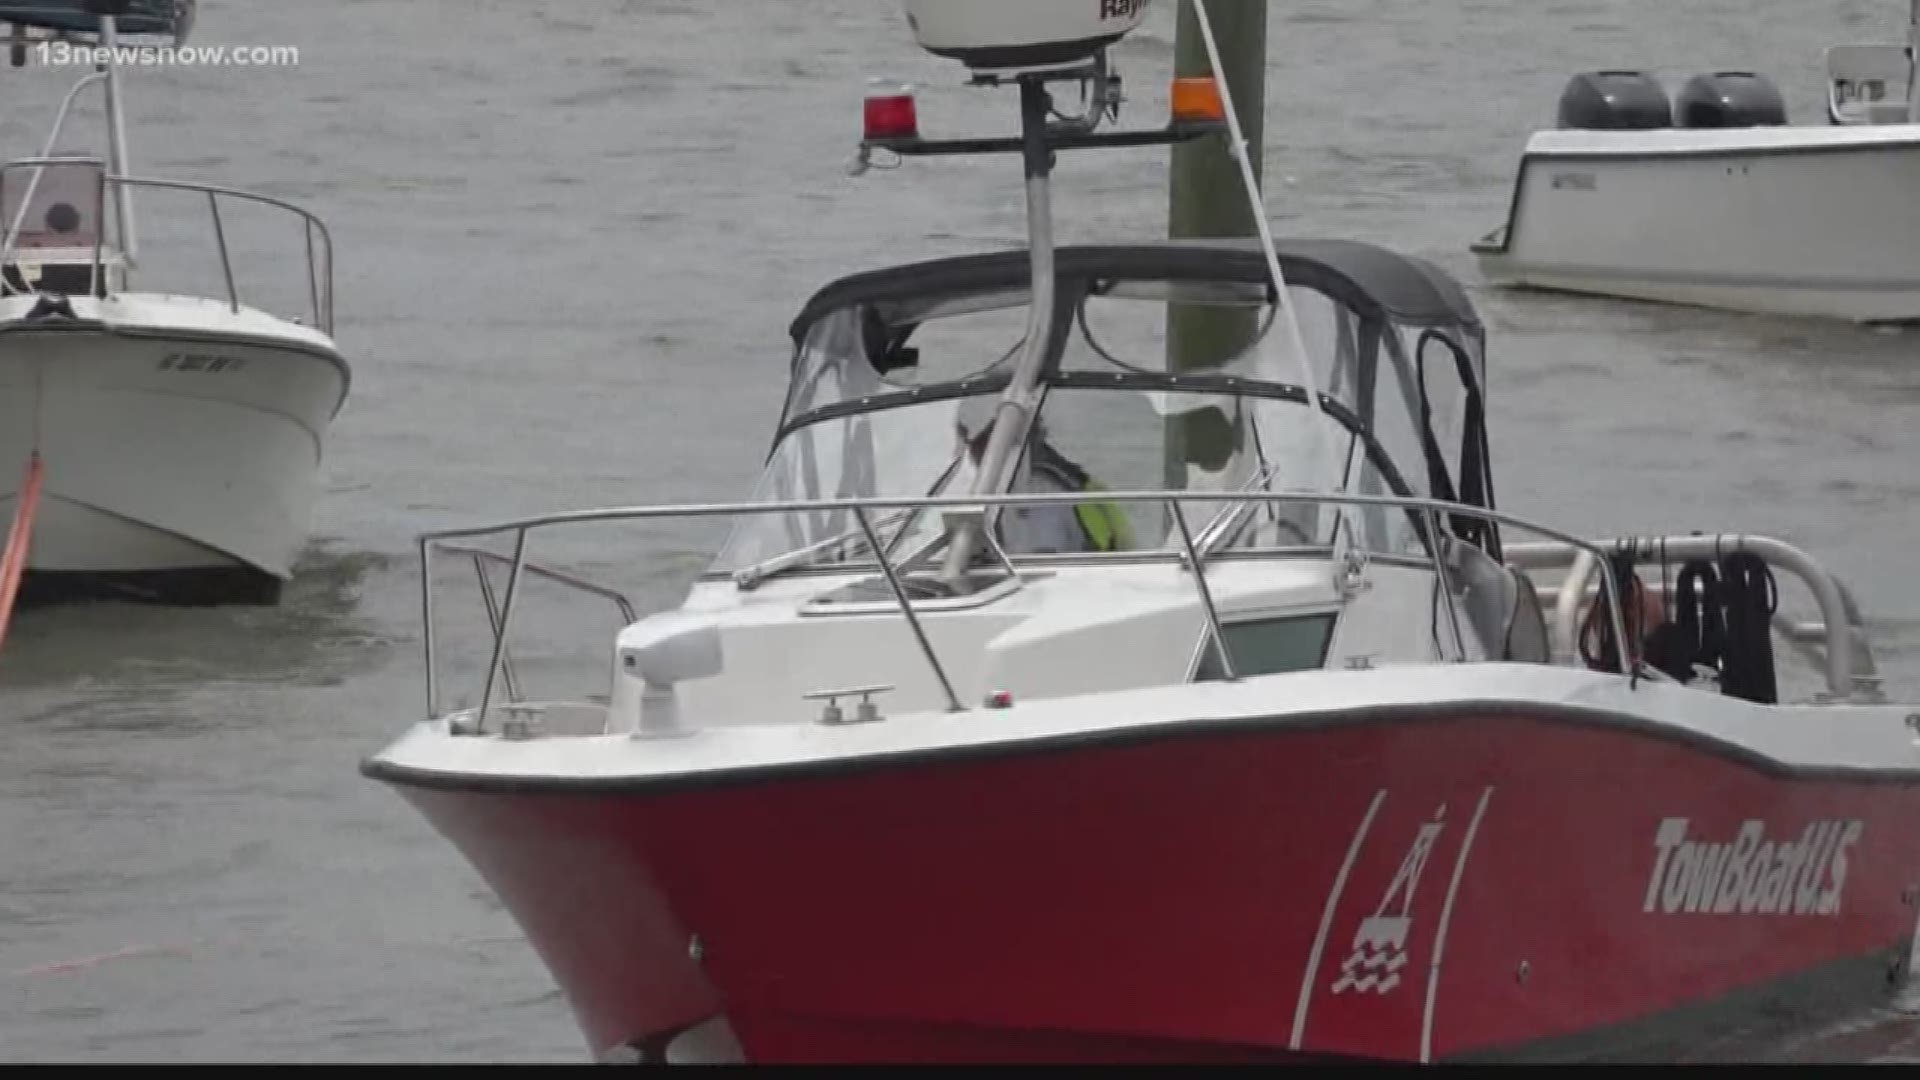 Five people were rescued from a capsized boat in Newport News